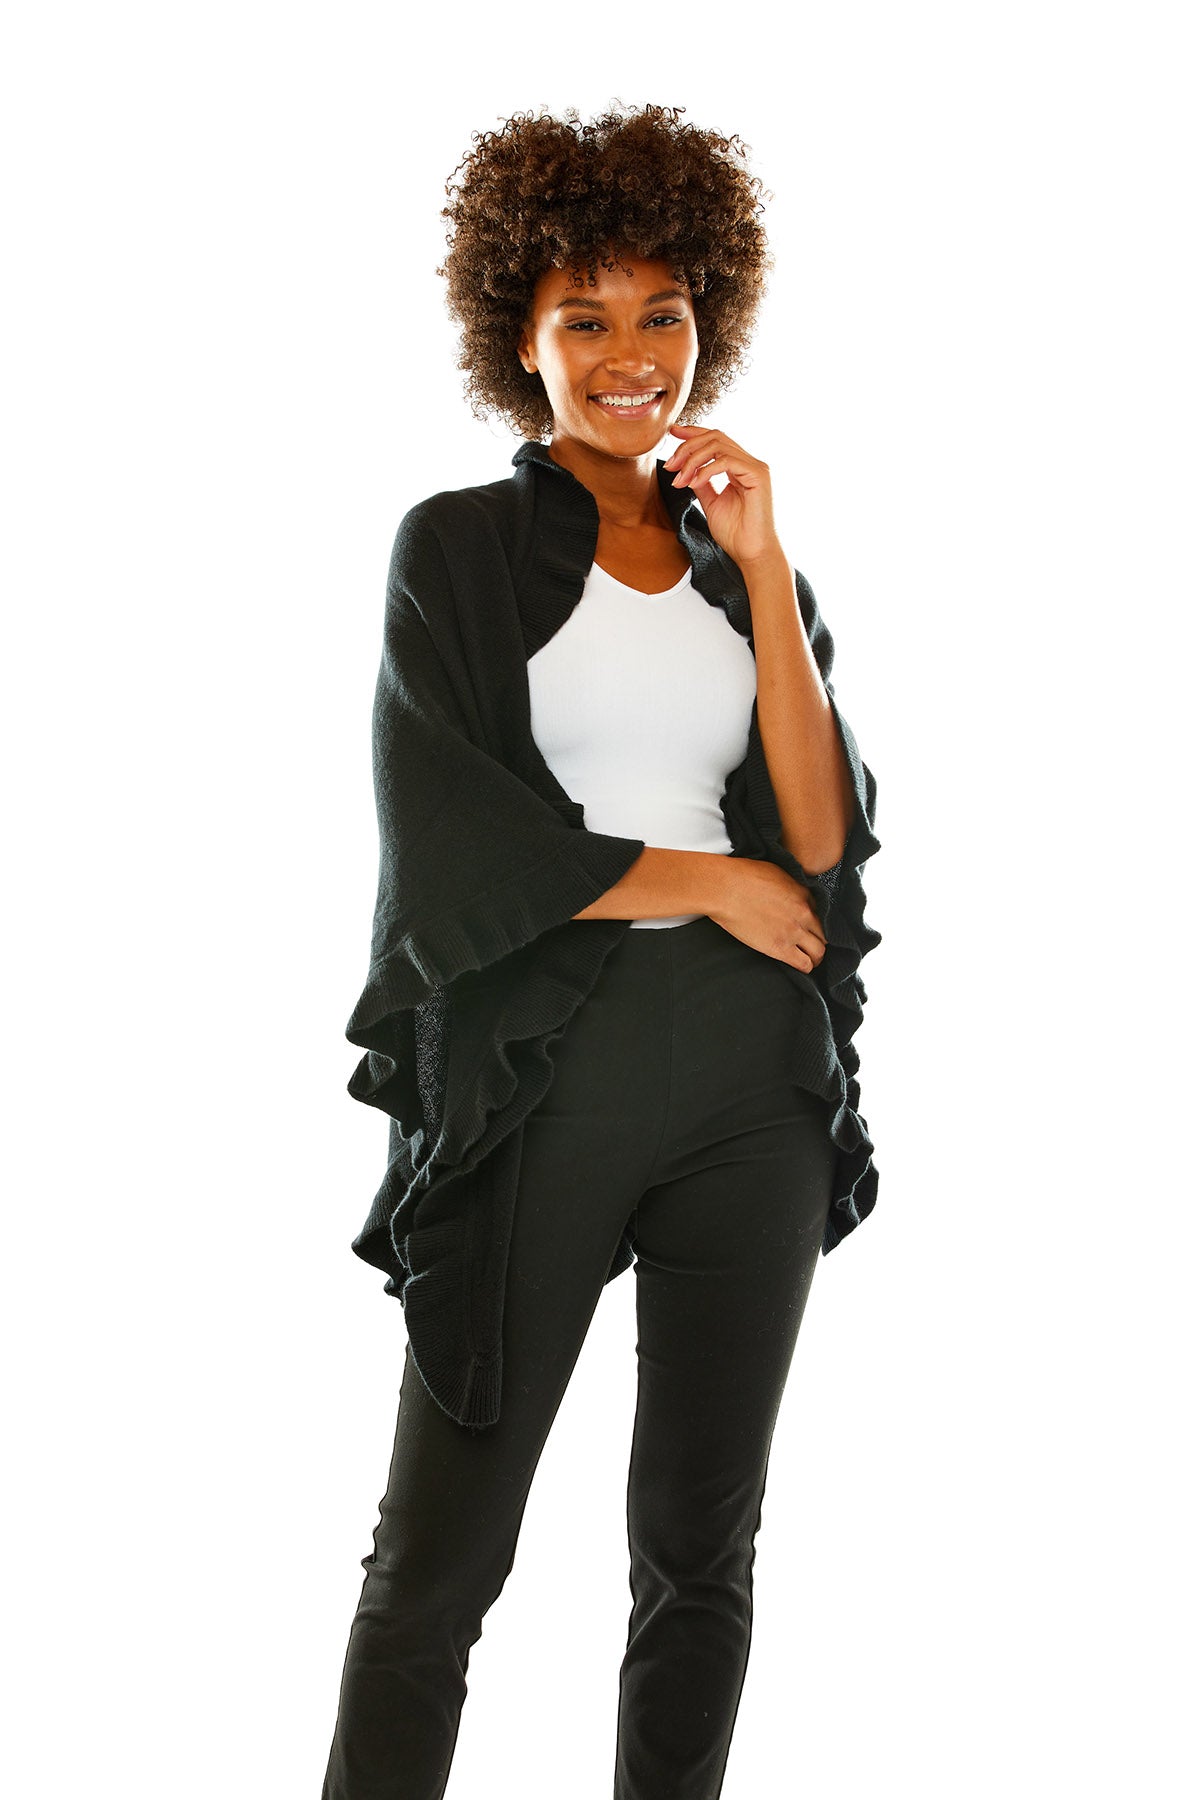 Black cashmere wrap with ruffle edge. Perfect for everyday wear and as a cocktail attire accessory